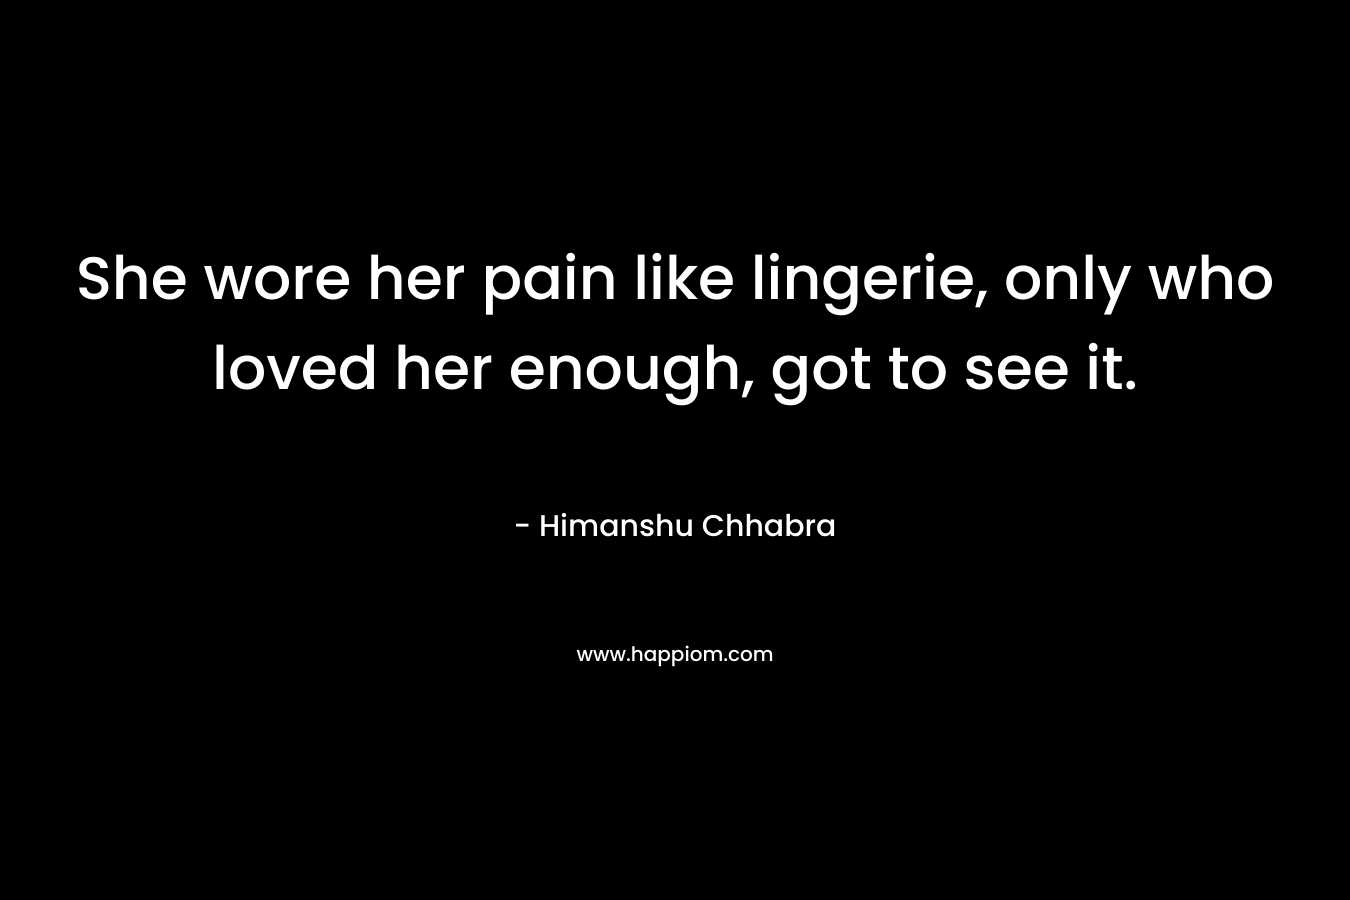 She wore her pain like lingerie, only who loved her enough, got to see it. – Himanshu Chhabra